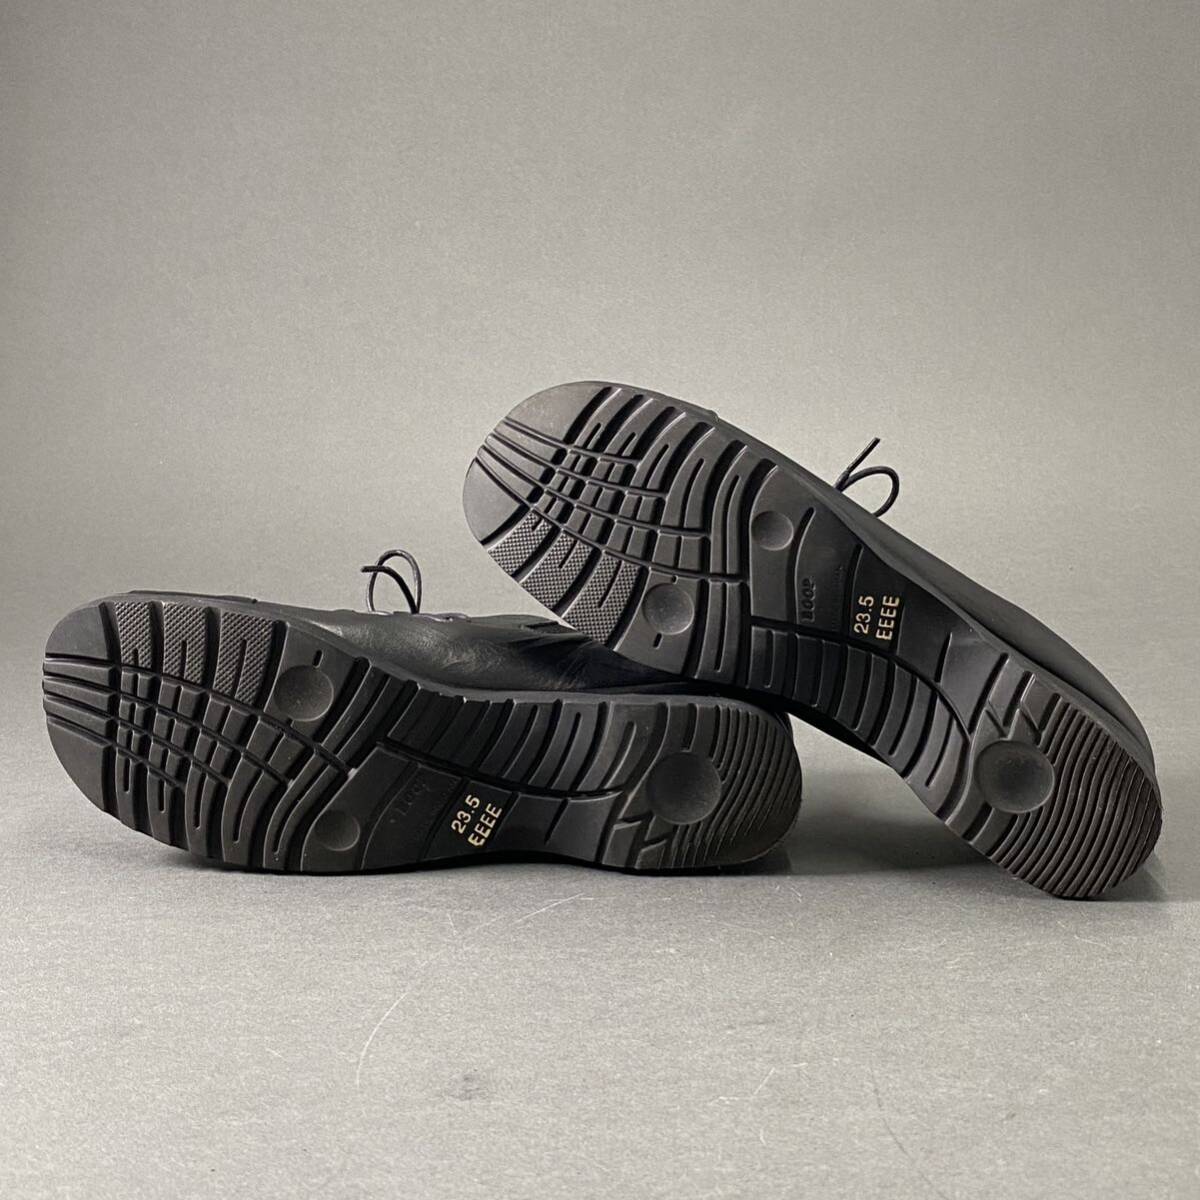 Bd13{ beautiful goods } made in Japan pipurepi pre original leather comfort shoes walking shoes leather sneakers 23.5cm 4E lady's women's shoes 